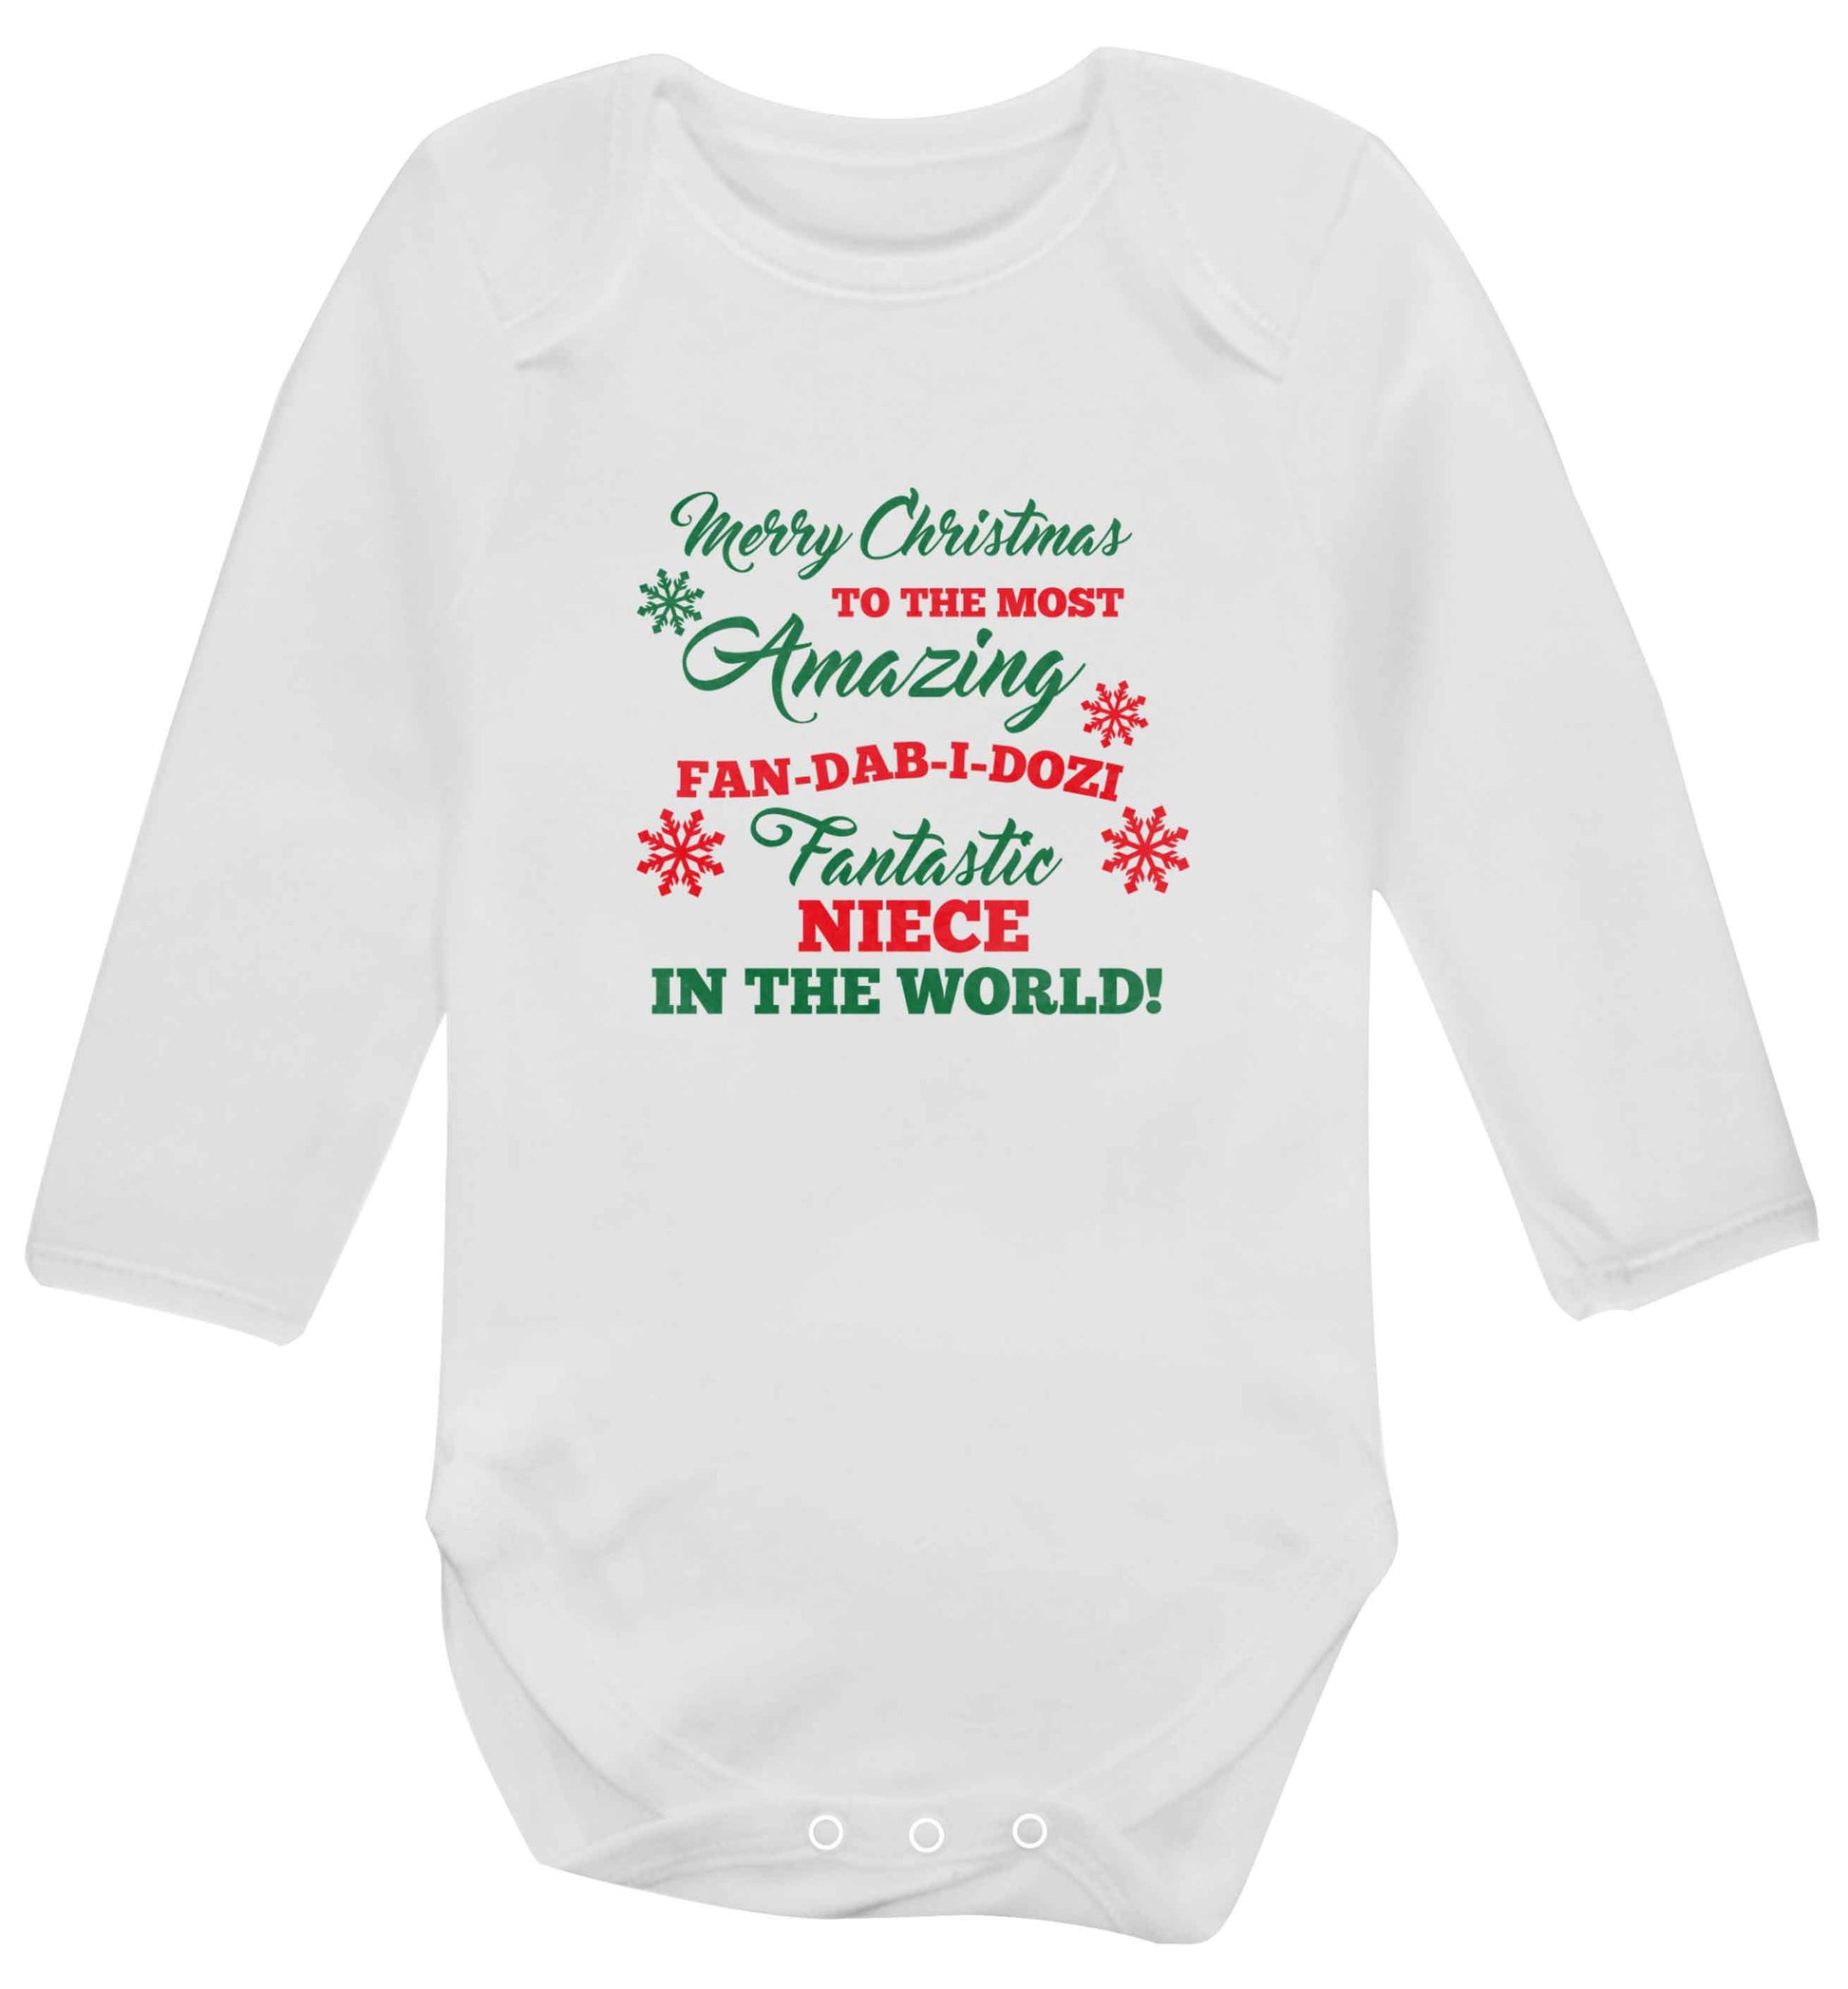 Merry Christmas to the most amazing fan-dab-i-dozi fantasic Niece in the world baby vest long sleeved white 6-12 months